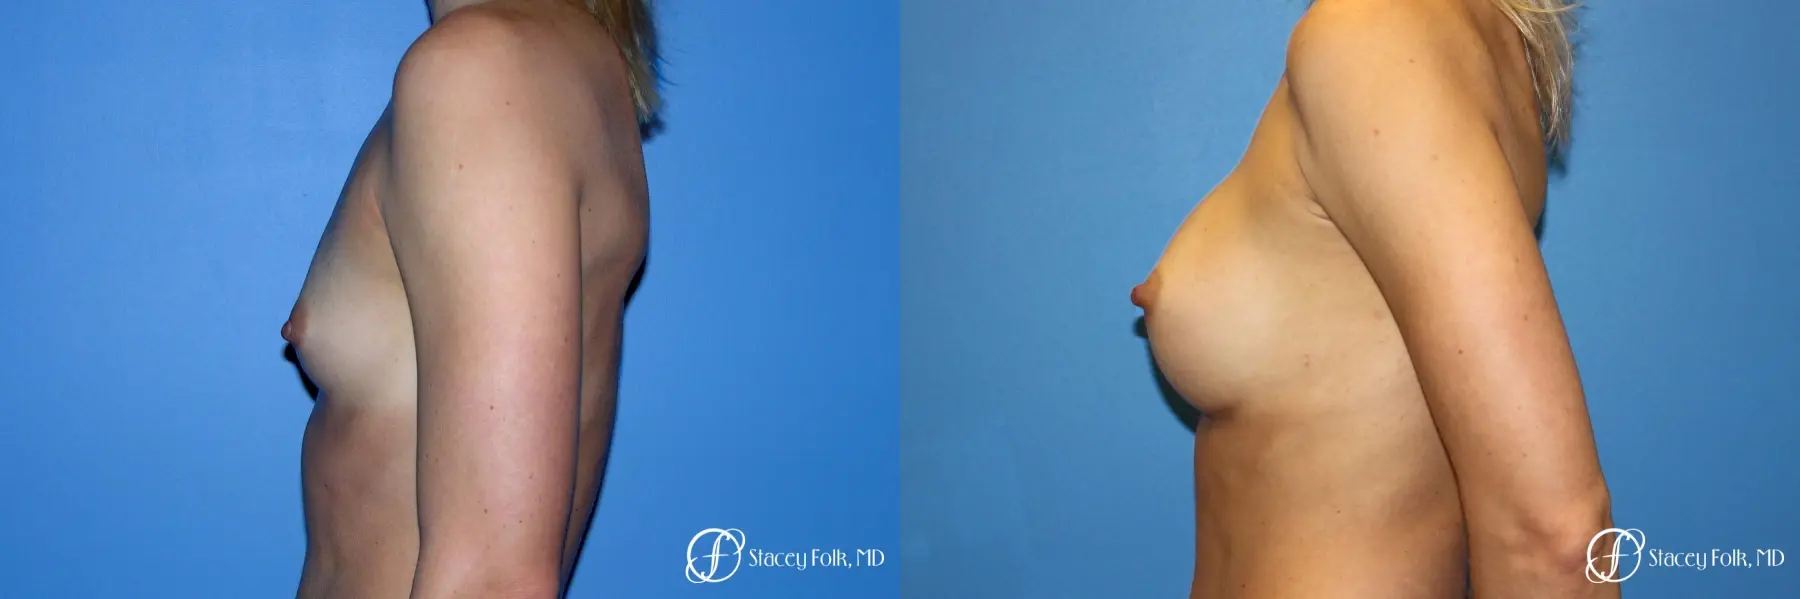 Denver Breast Augmentation 8202 - Before and After 3